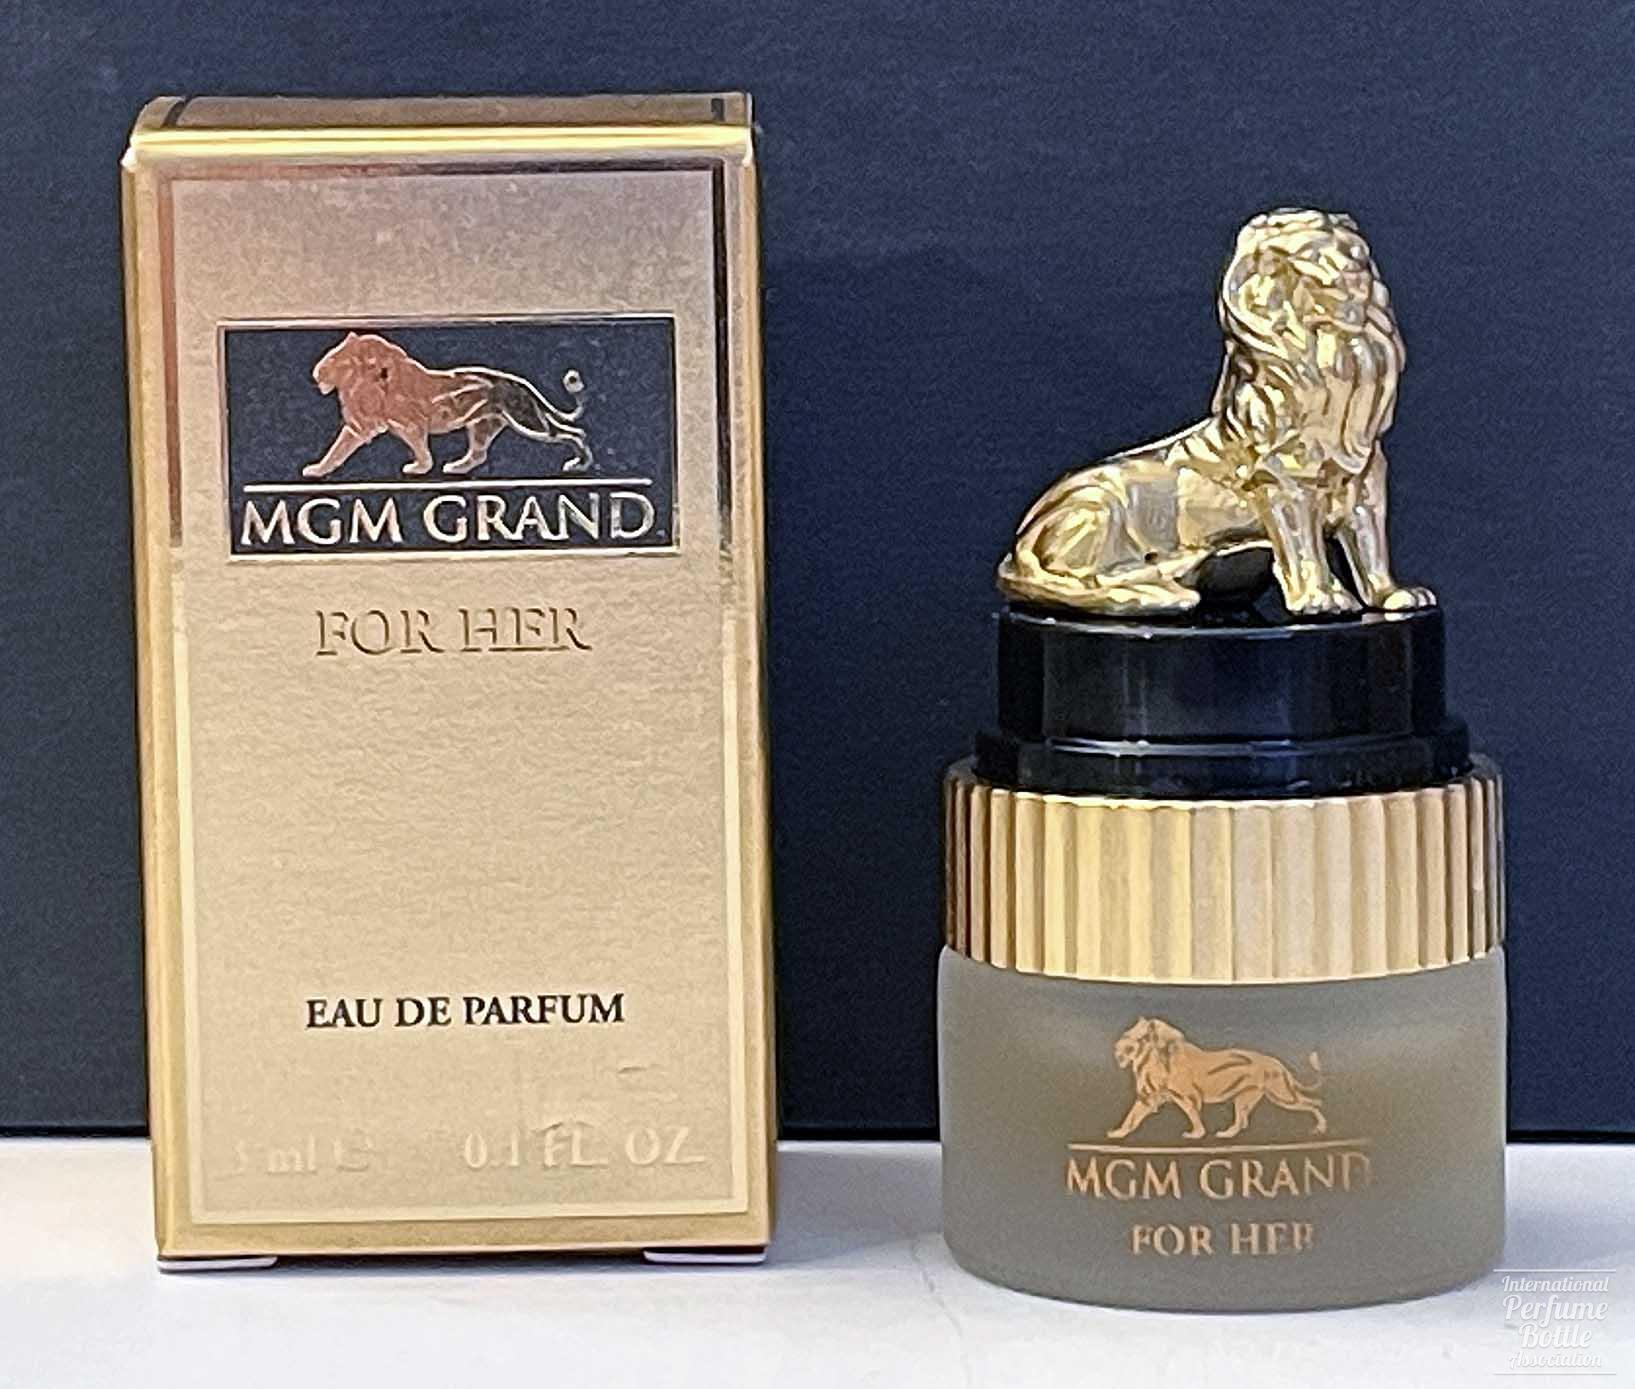 "For Her" Lion Presentation by MGM Grand, mini